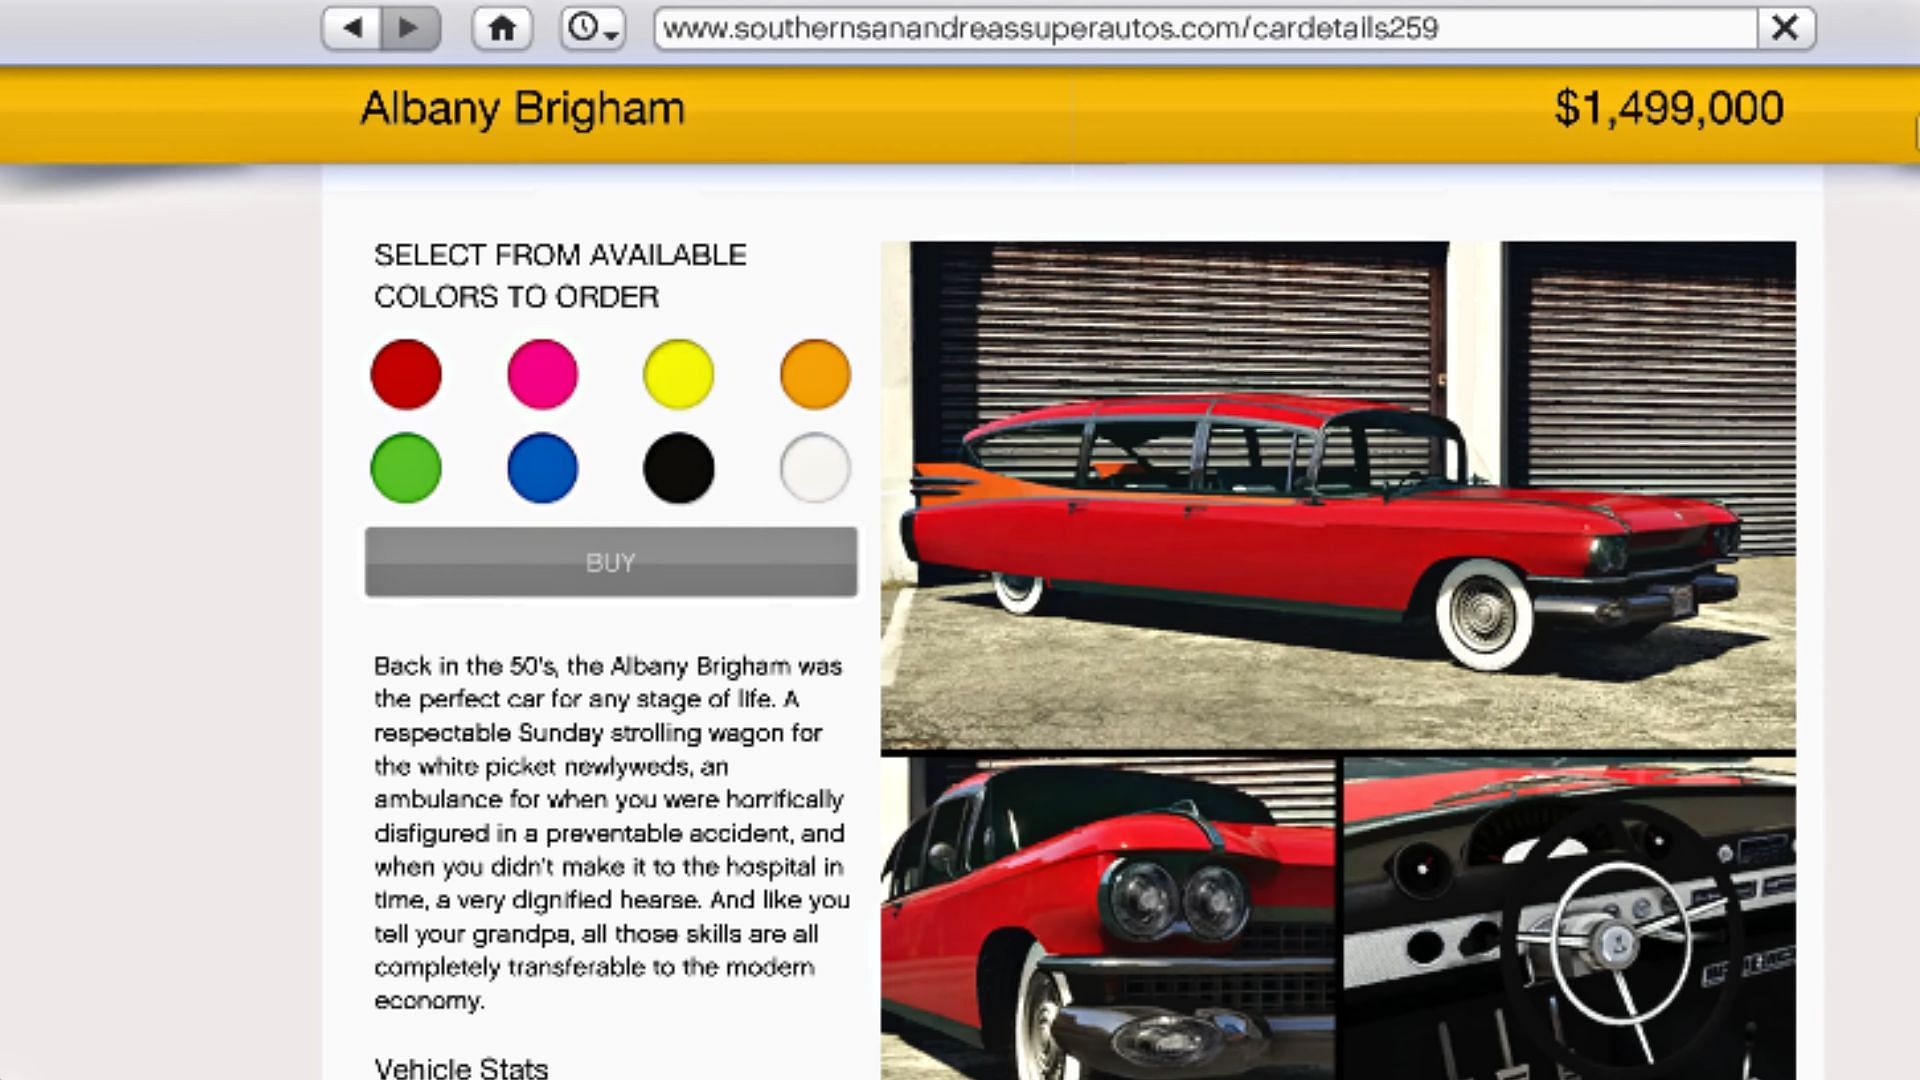 Albany Brigham&#039;s page on Southern San Andreas Super Autos (Image via YouTube/GTA Series Videos)